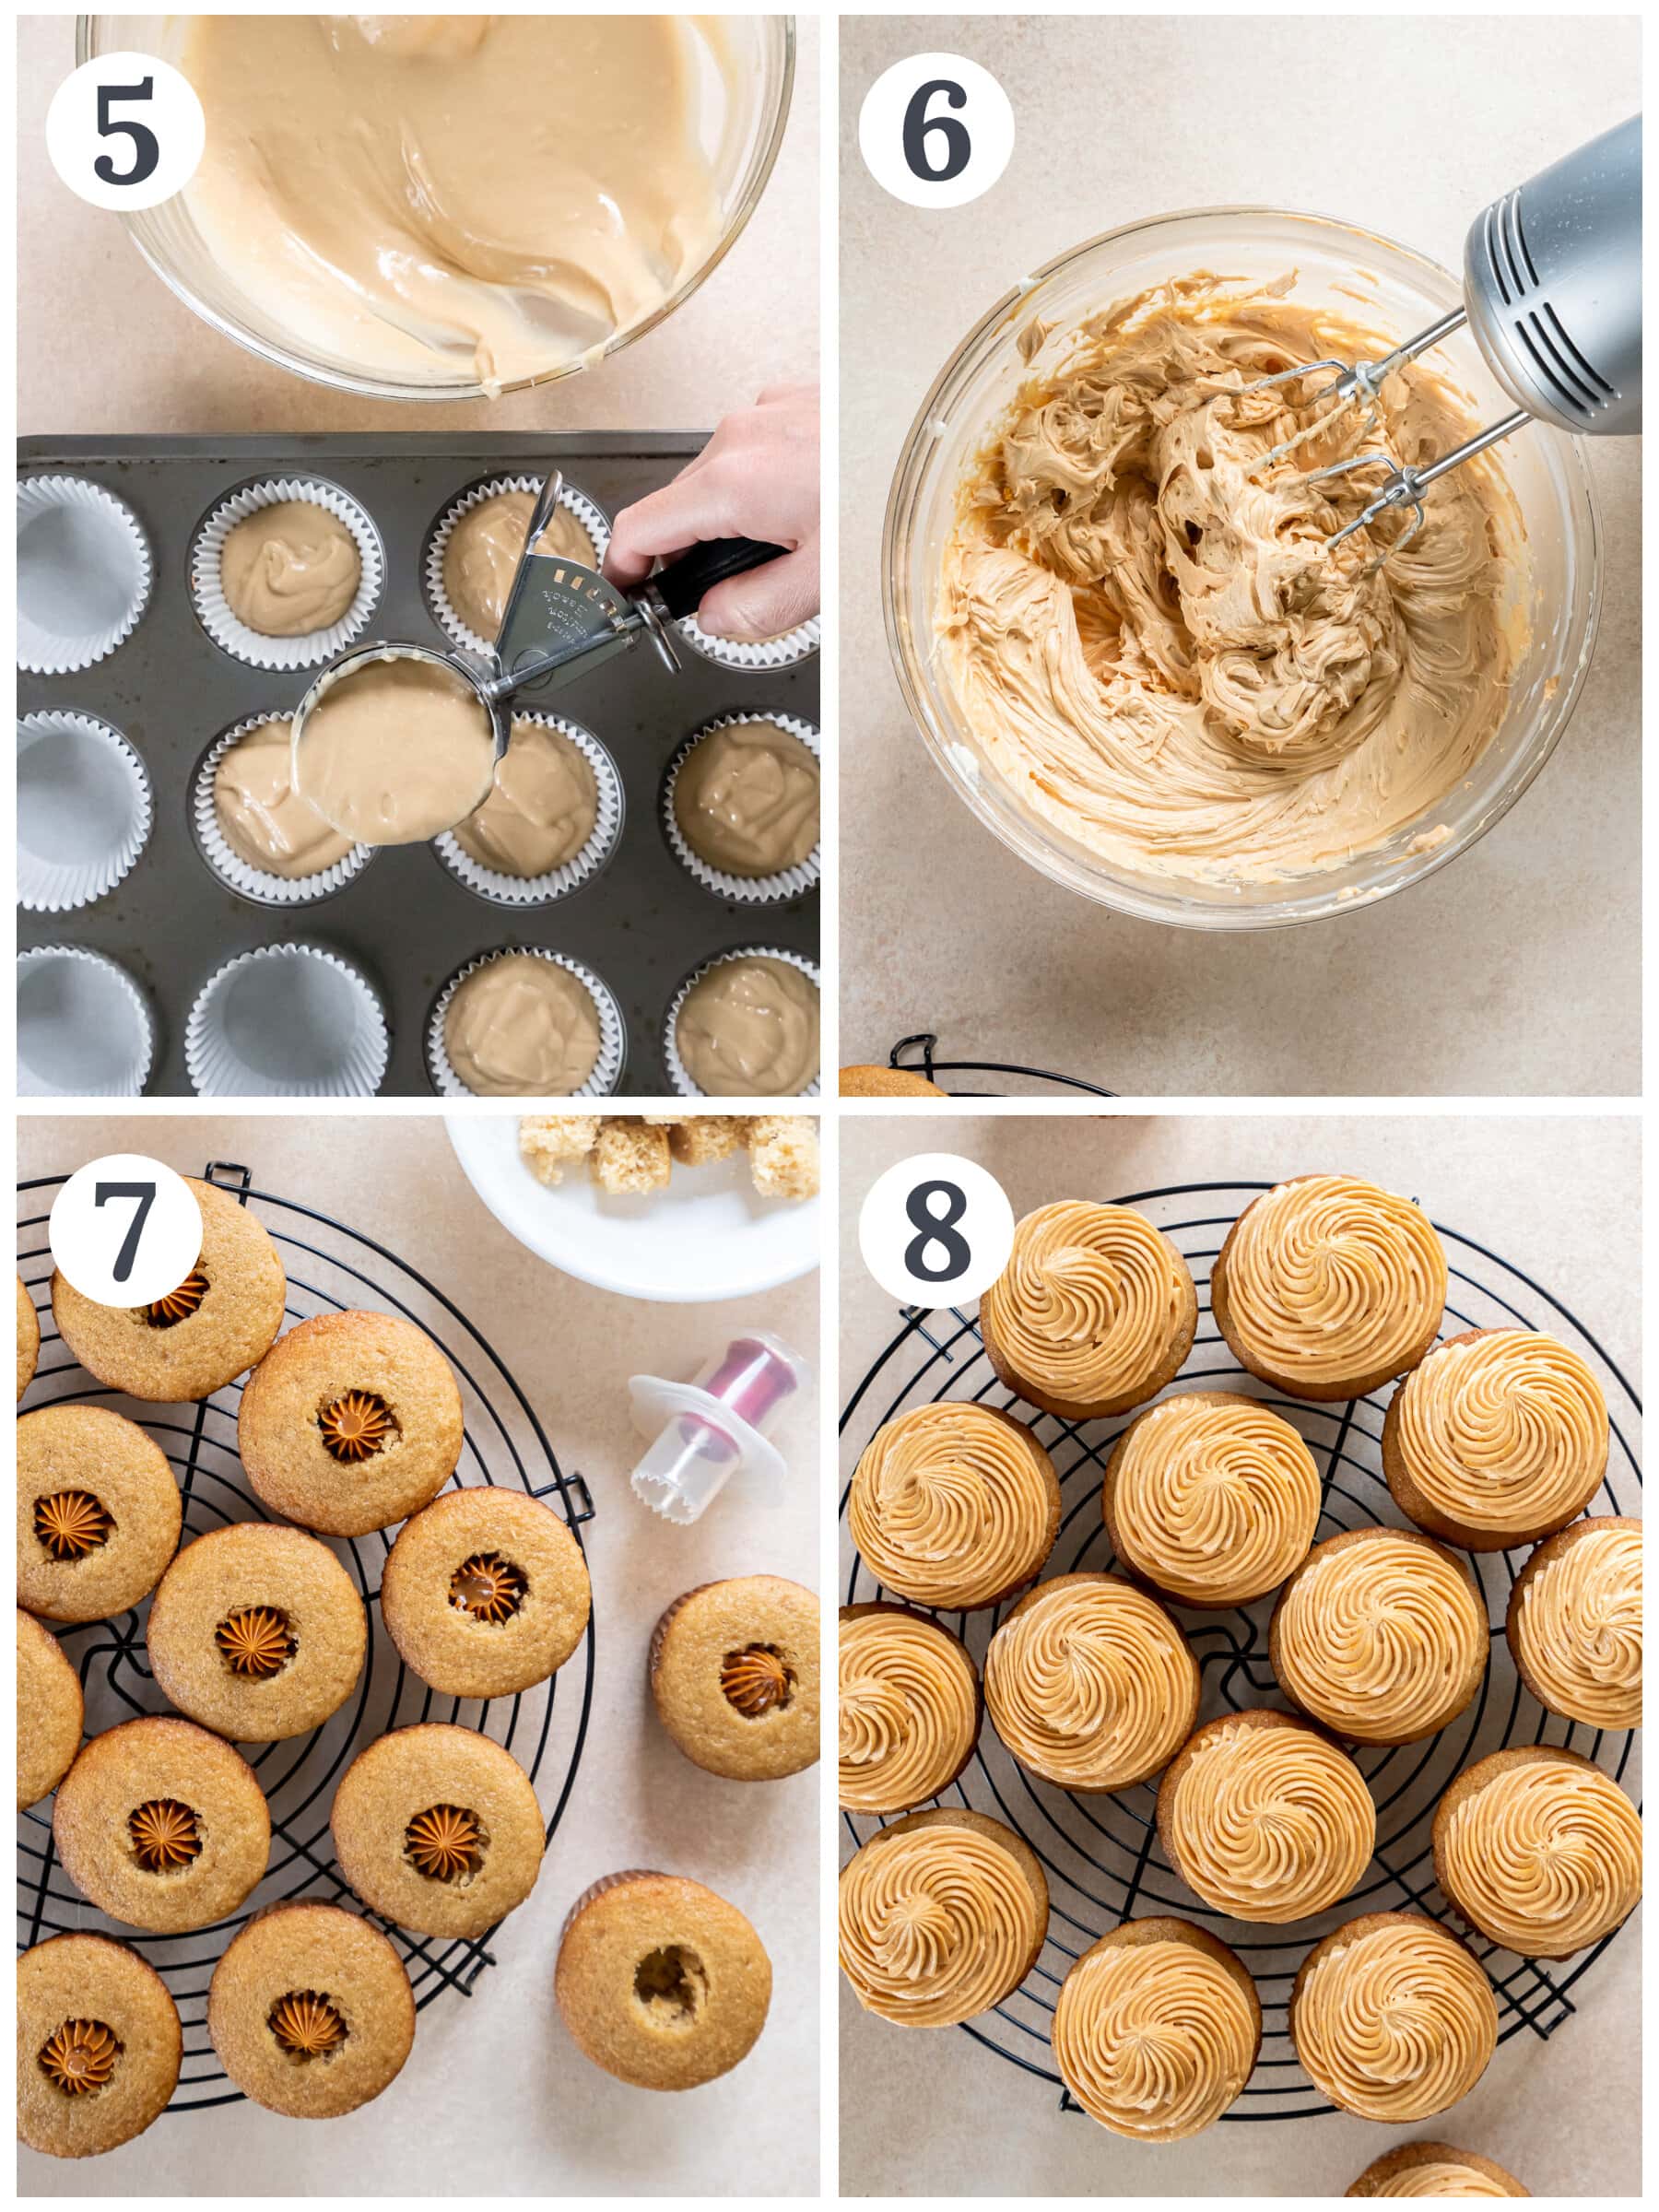 photo collage demonstrating how to make cupcakes stuffed with dulce de leche and topped with buttercream.